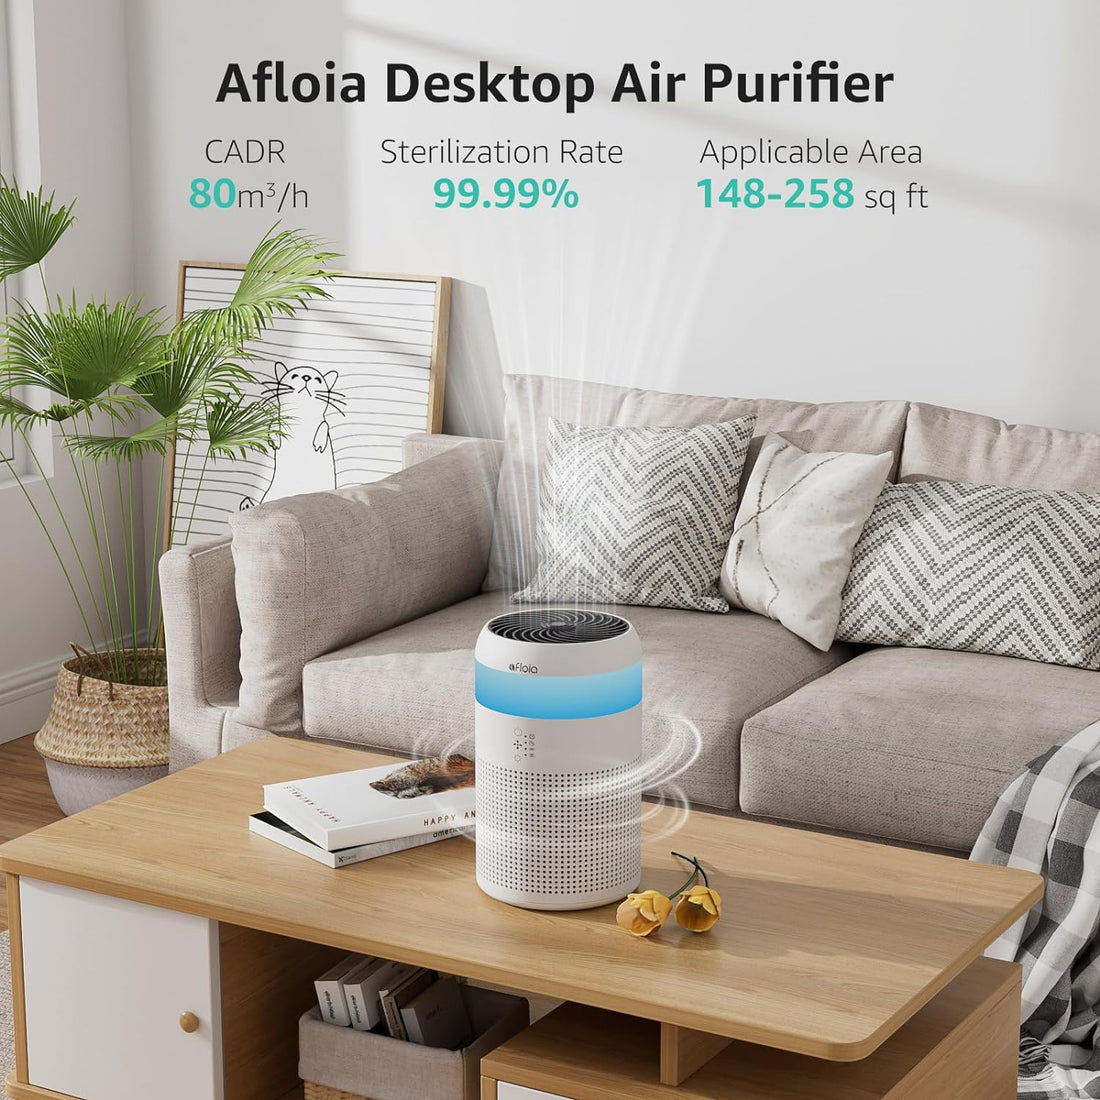 Afloia HEPA Mini Air Purifiers for Bedroom with 7 Colors Light & Fragrance Sponge for Home Office Living Room, Small Desktop Air Purifier for Pet Dander Mold Pollen Odor Smoke Dust